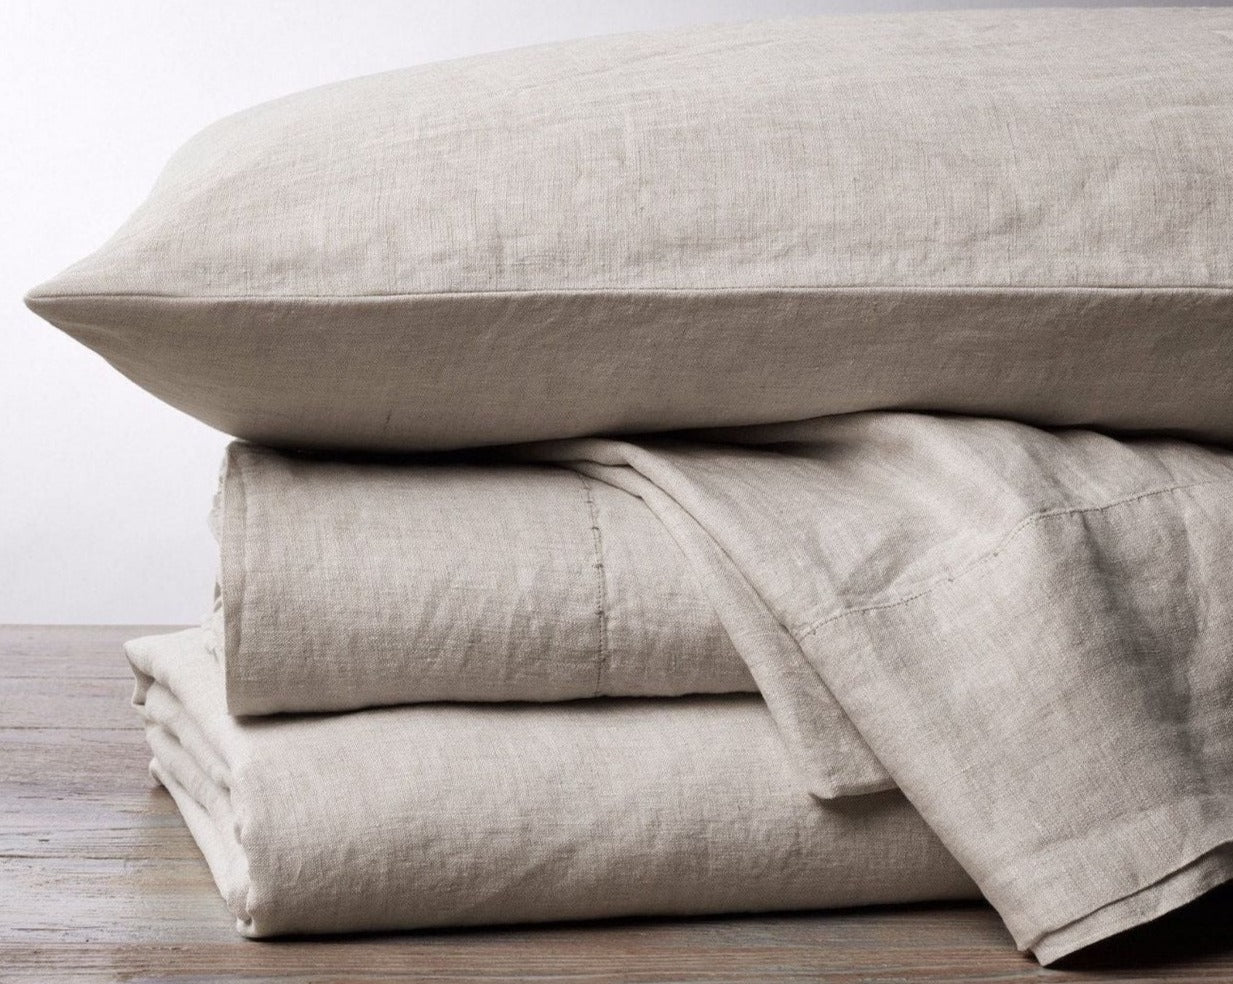 Organic Linen Bedding - Available at Resthouse